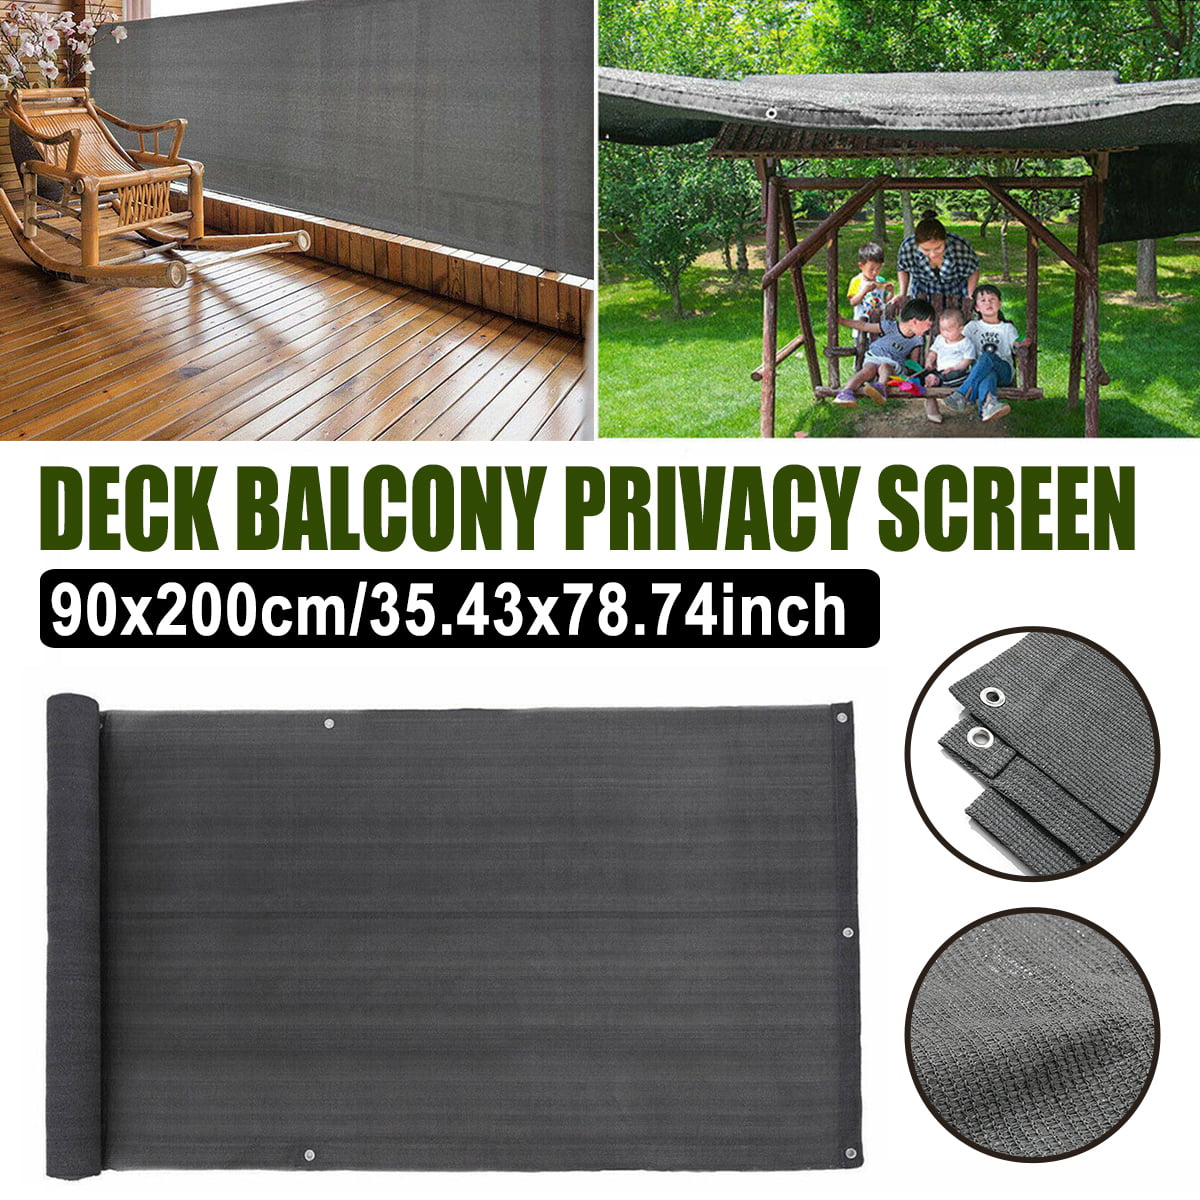 Patio Privacy Screen 3'x16.4' with 39' Rope and 38 Zip Ties Black OAK LEAF Balcony Privacy Screen Cover UV Weather Resistant Apartments or Outdoor Heavy Duty 210GSM Balcony Screen for Porch 